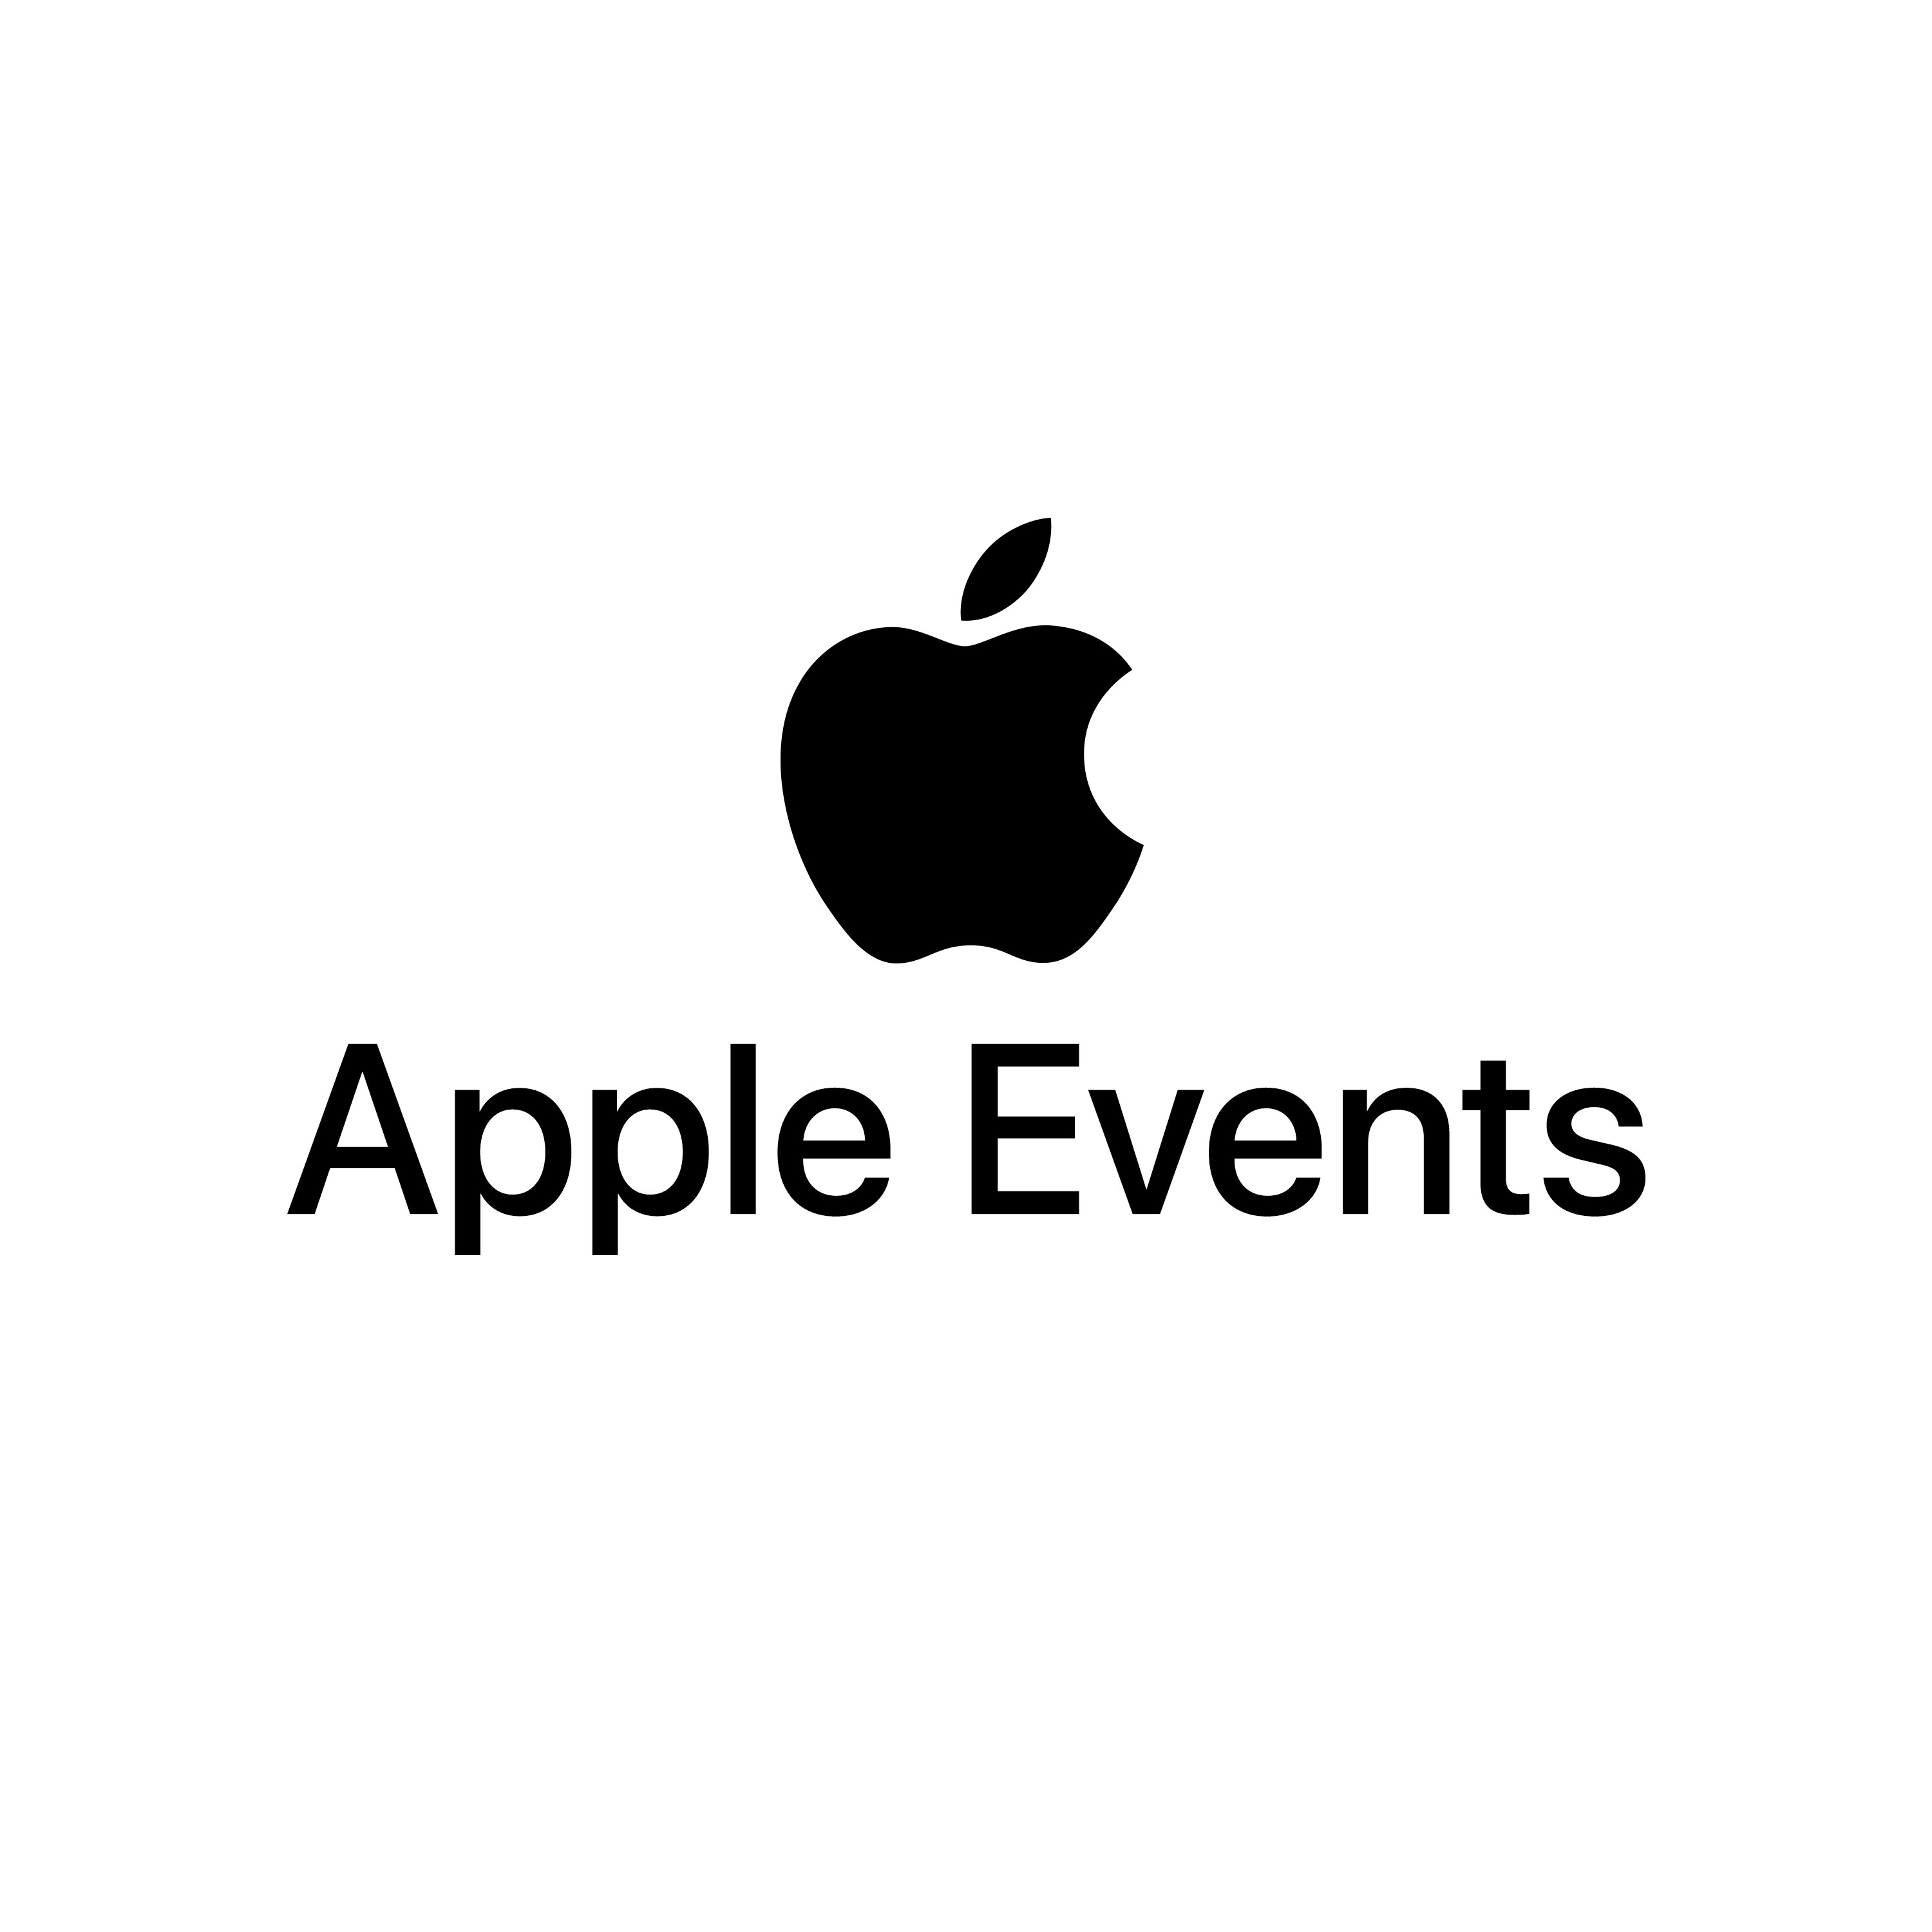 Introducing Apple Events